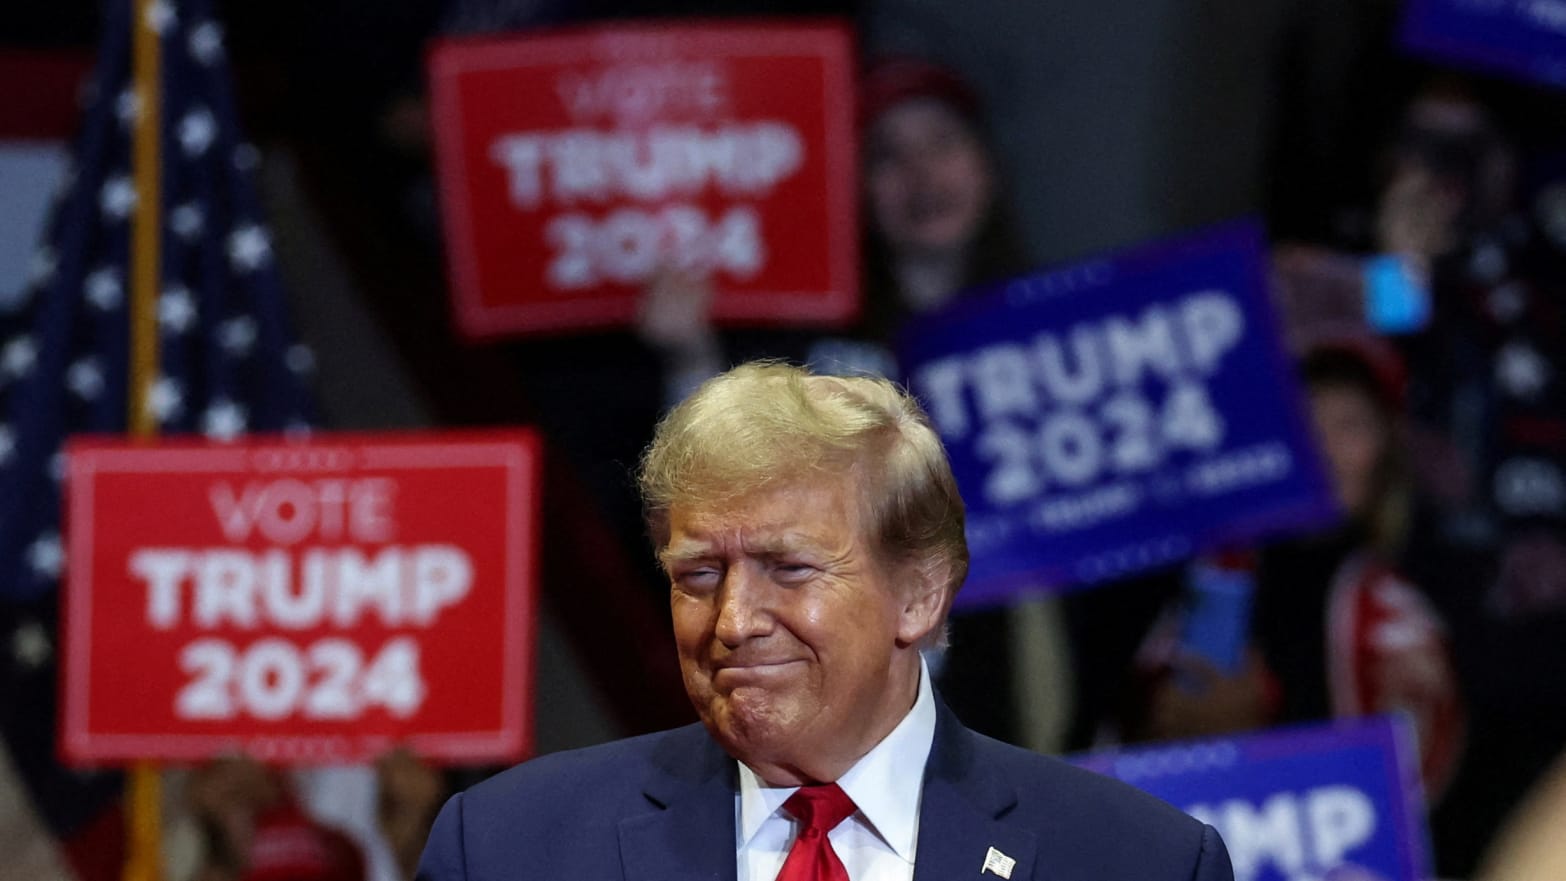 Republican presidential candidate and former U.S. President Donald Trump speaks during a campaign rally at Winthrop Coliseum ahead of the South Carolina Republican presidential primary, in Rock Hill, South Carolina, U.S., February 23, 2024. 